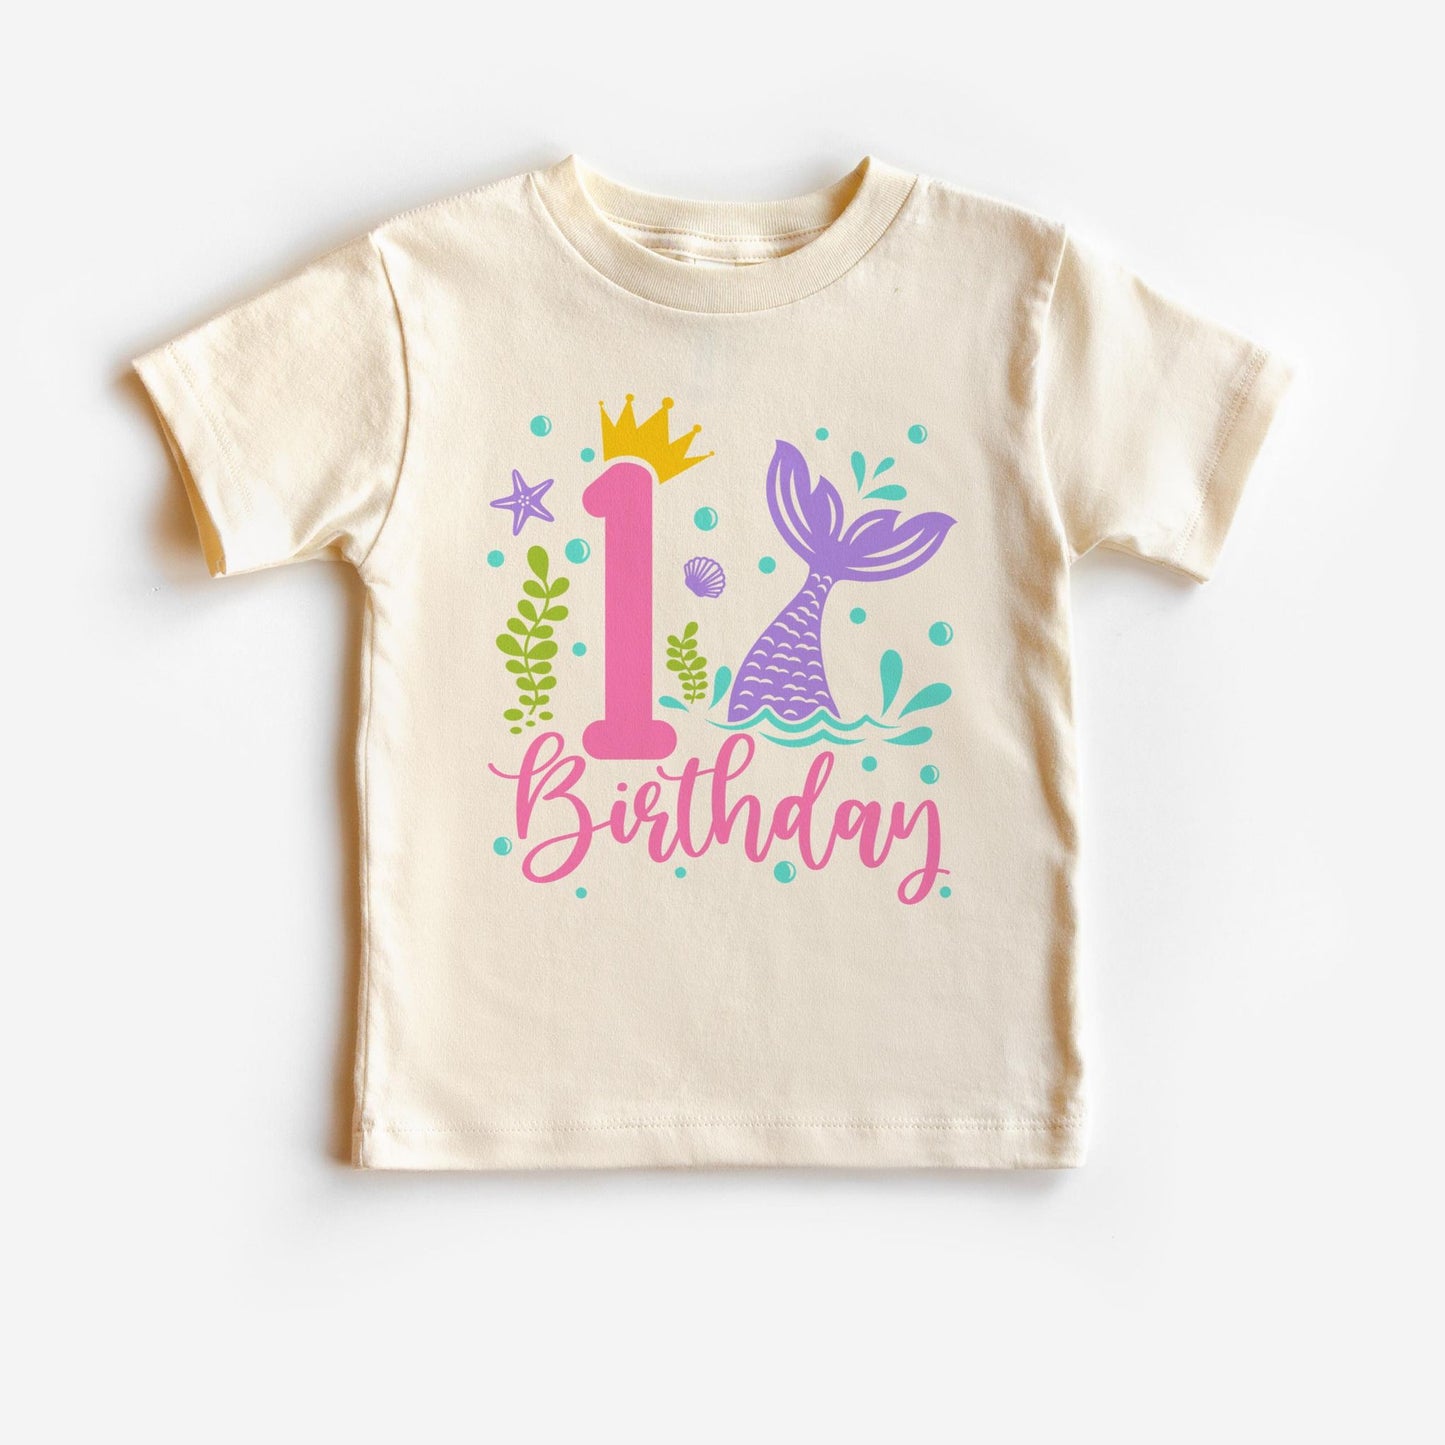 Toddler’s First Birthday Mermaid T-shirt is